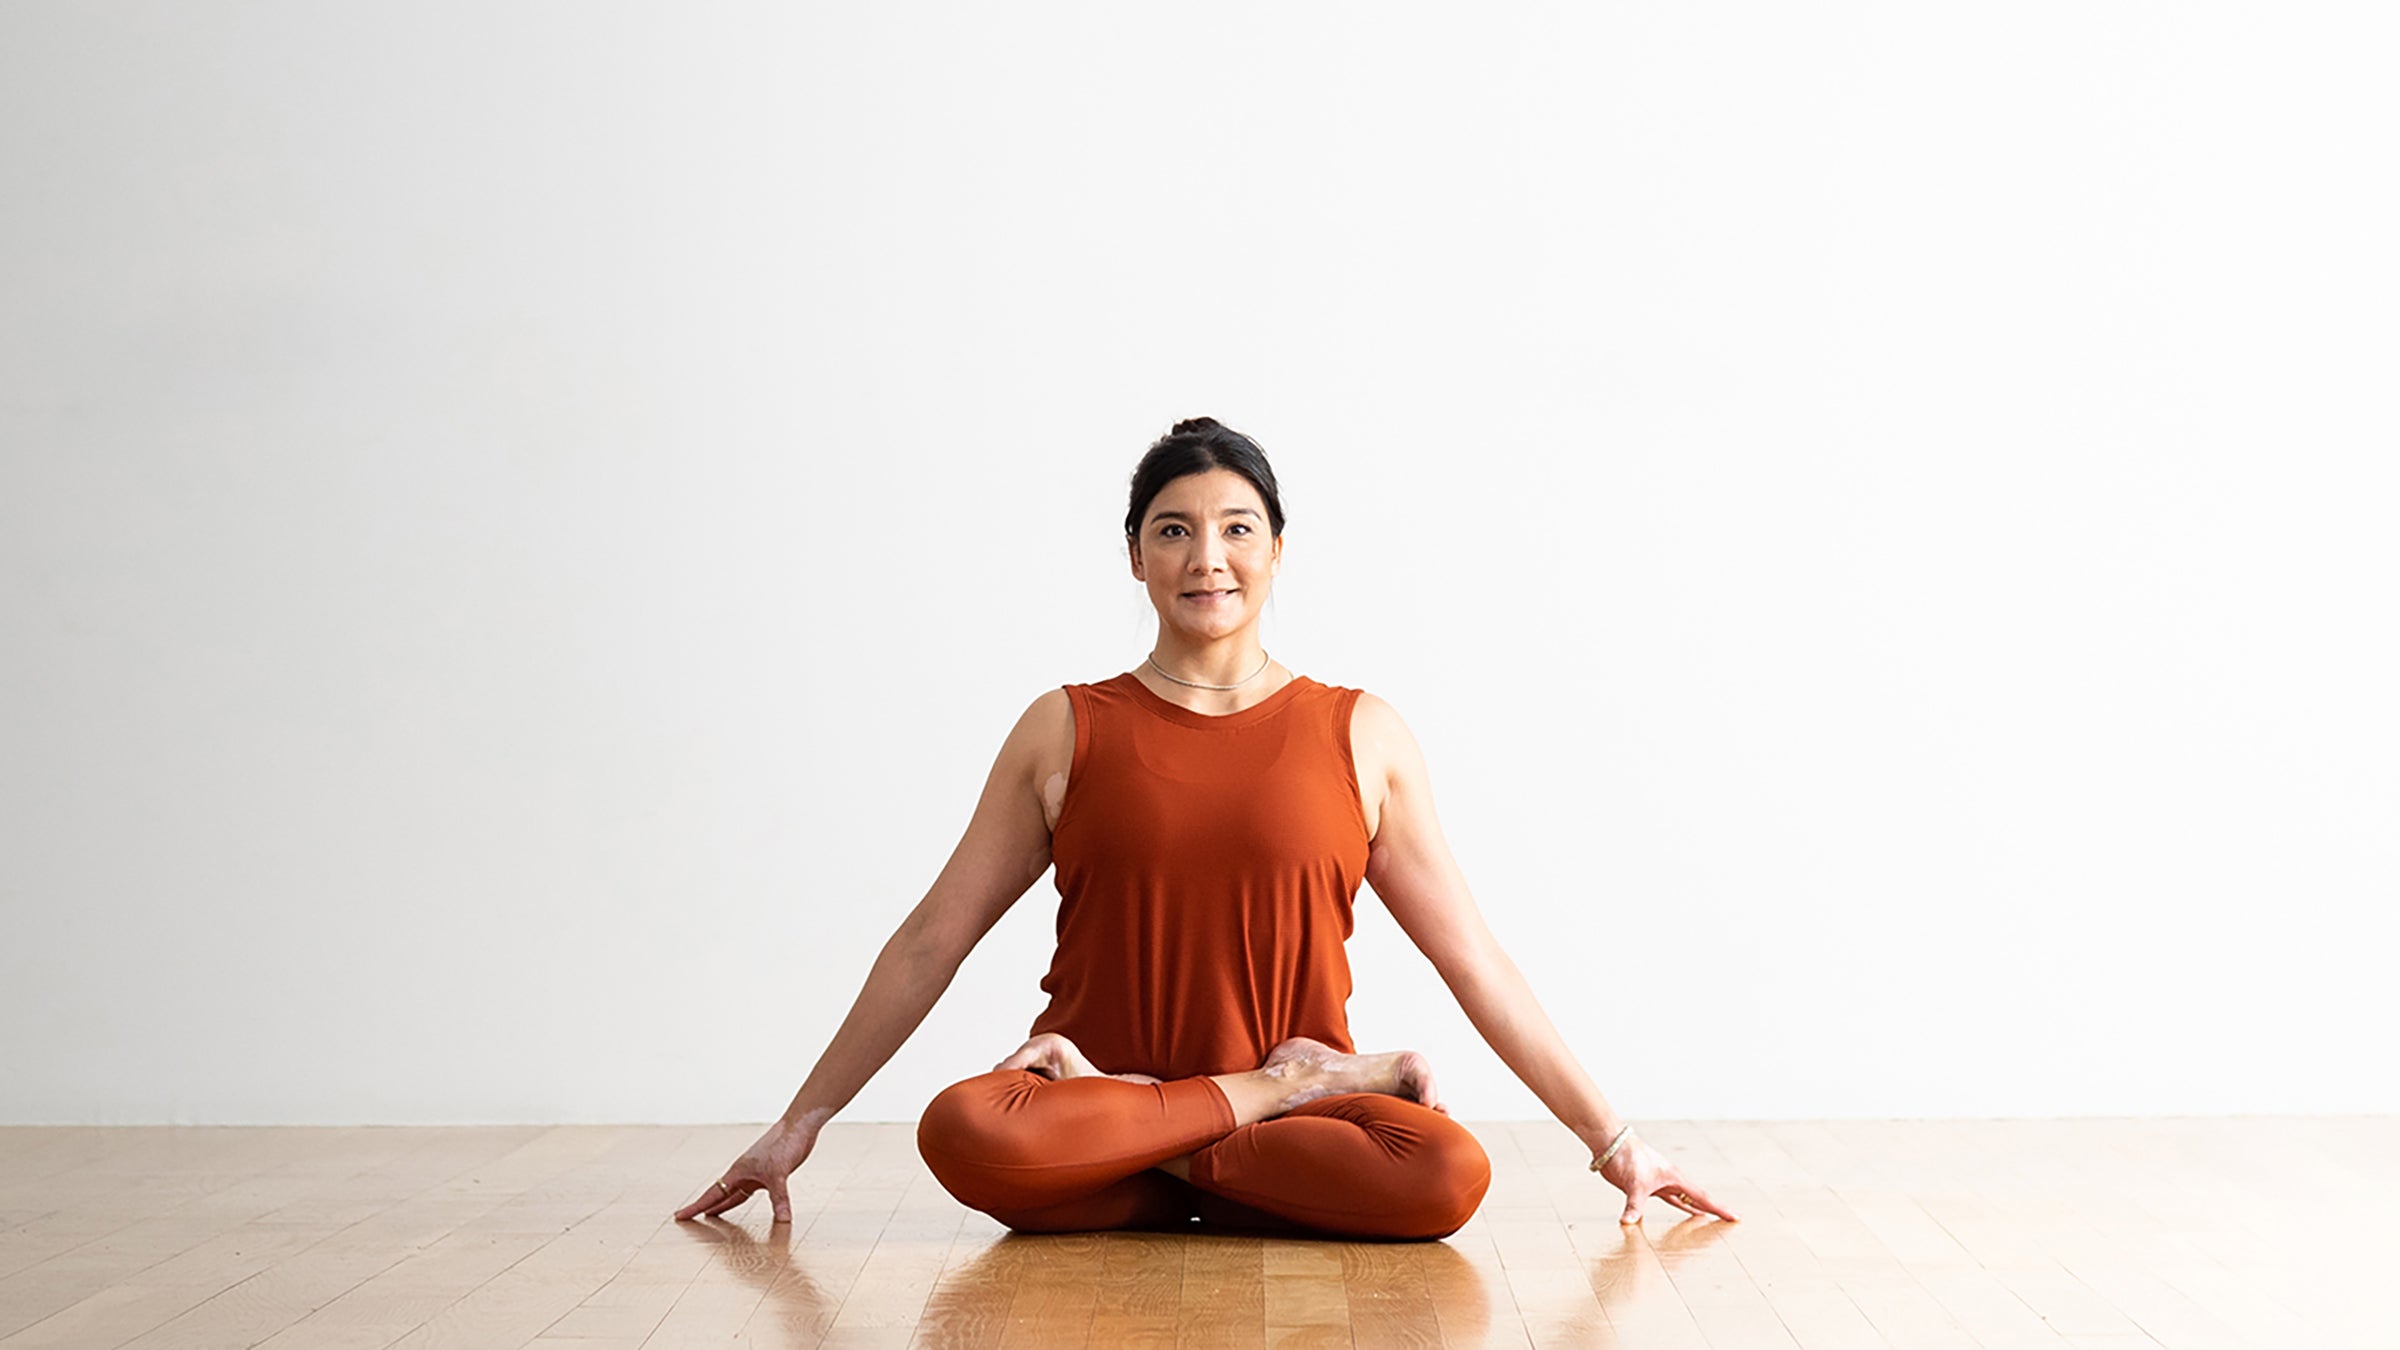 Which yoga is better for asthma? - Quora